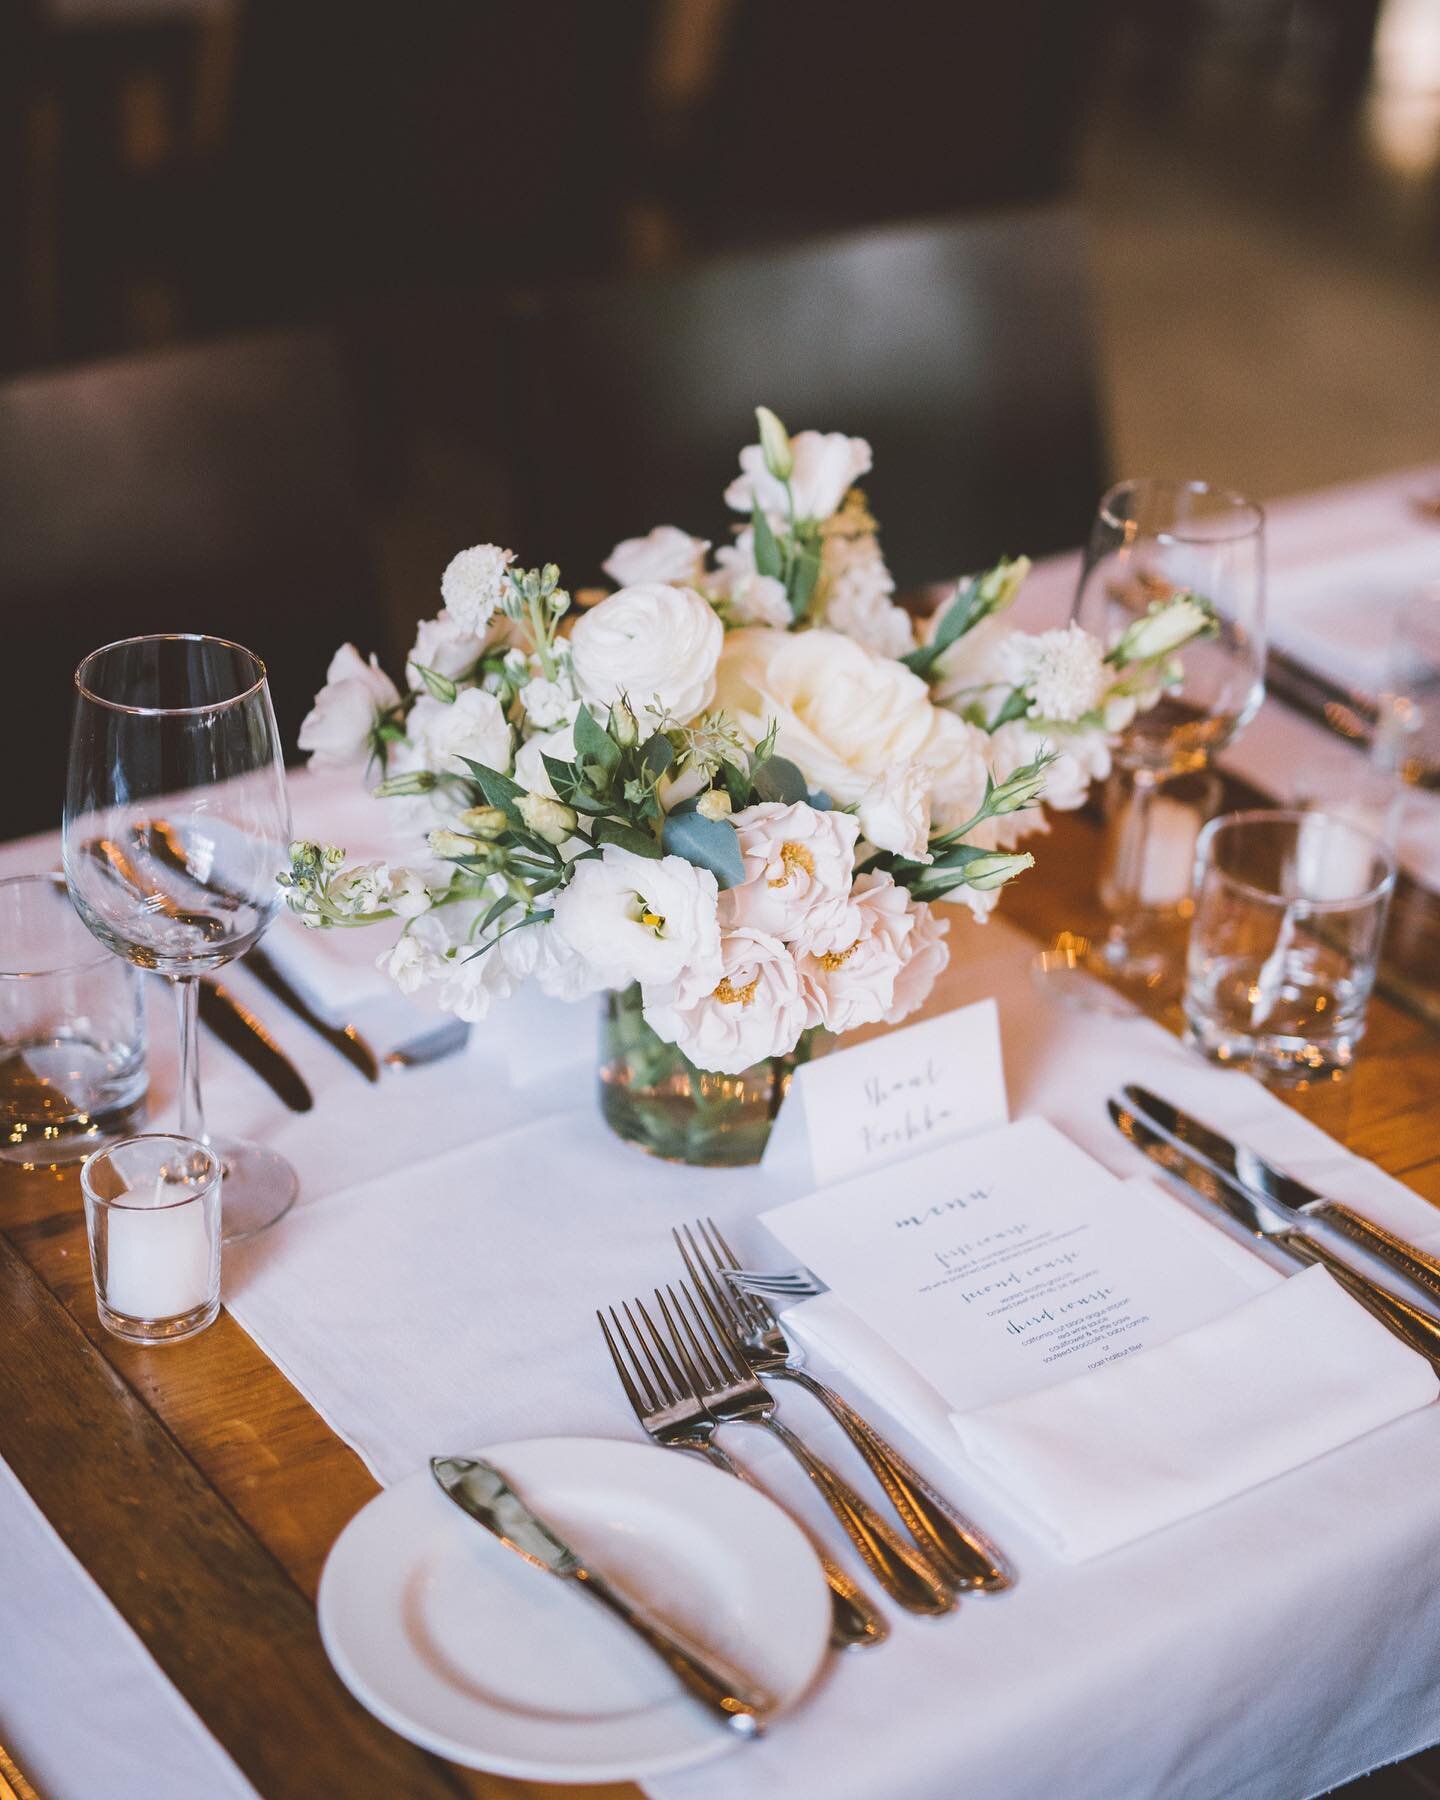 Blooms of happiness gracing each table! 🌸✨We love the simplicity of small floral arrangements. 
⠀⠀⠀⠀⠀⠀⠀⠀⠀
📷: Nikki Mills Photography
⠀⠀⠀⠀⠀⠀⠀⠀⠀
#guesttables #tableflowers #weddingcoordinator #torontowedding